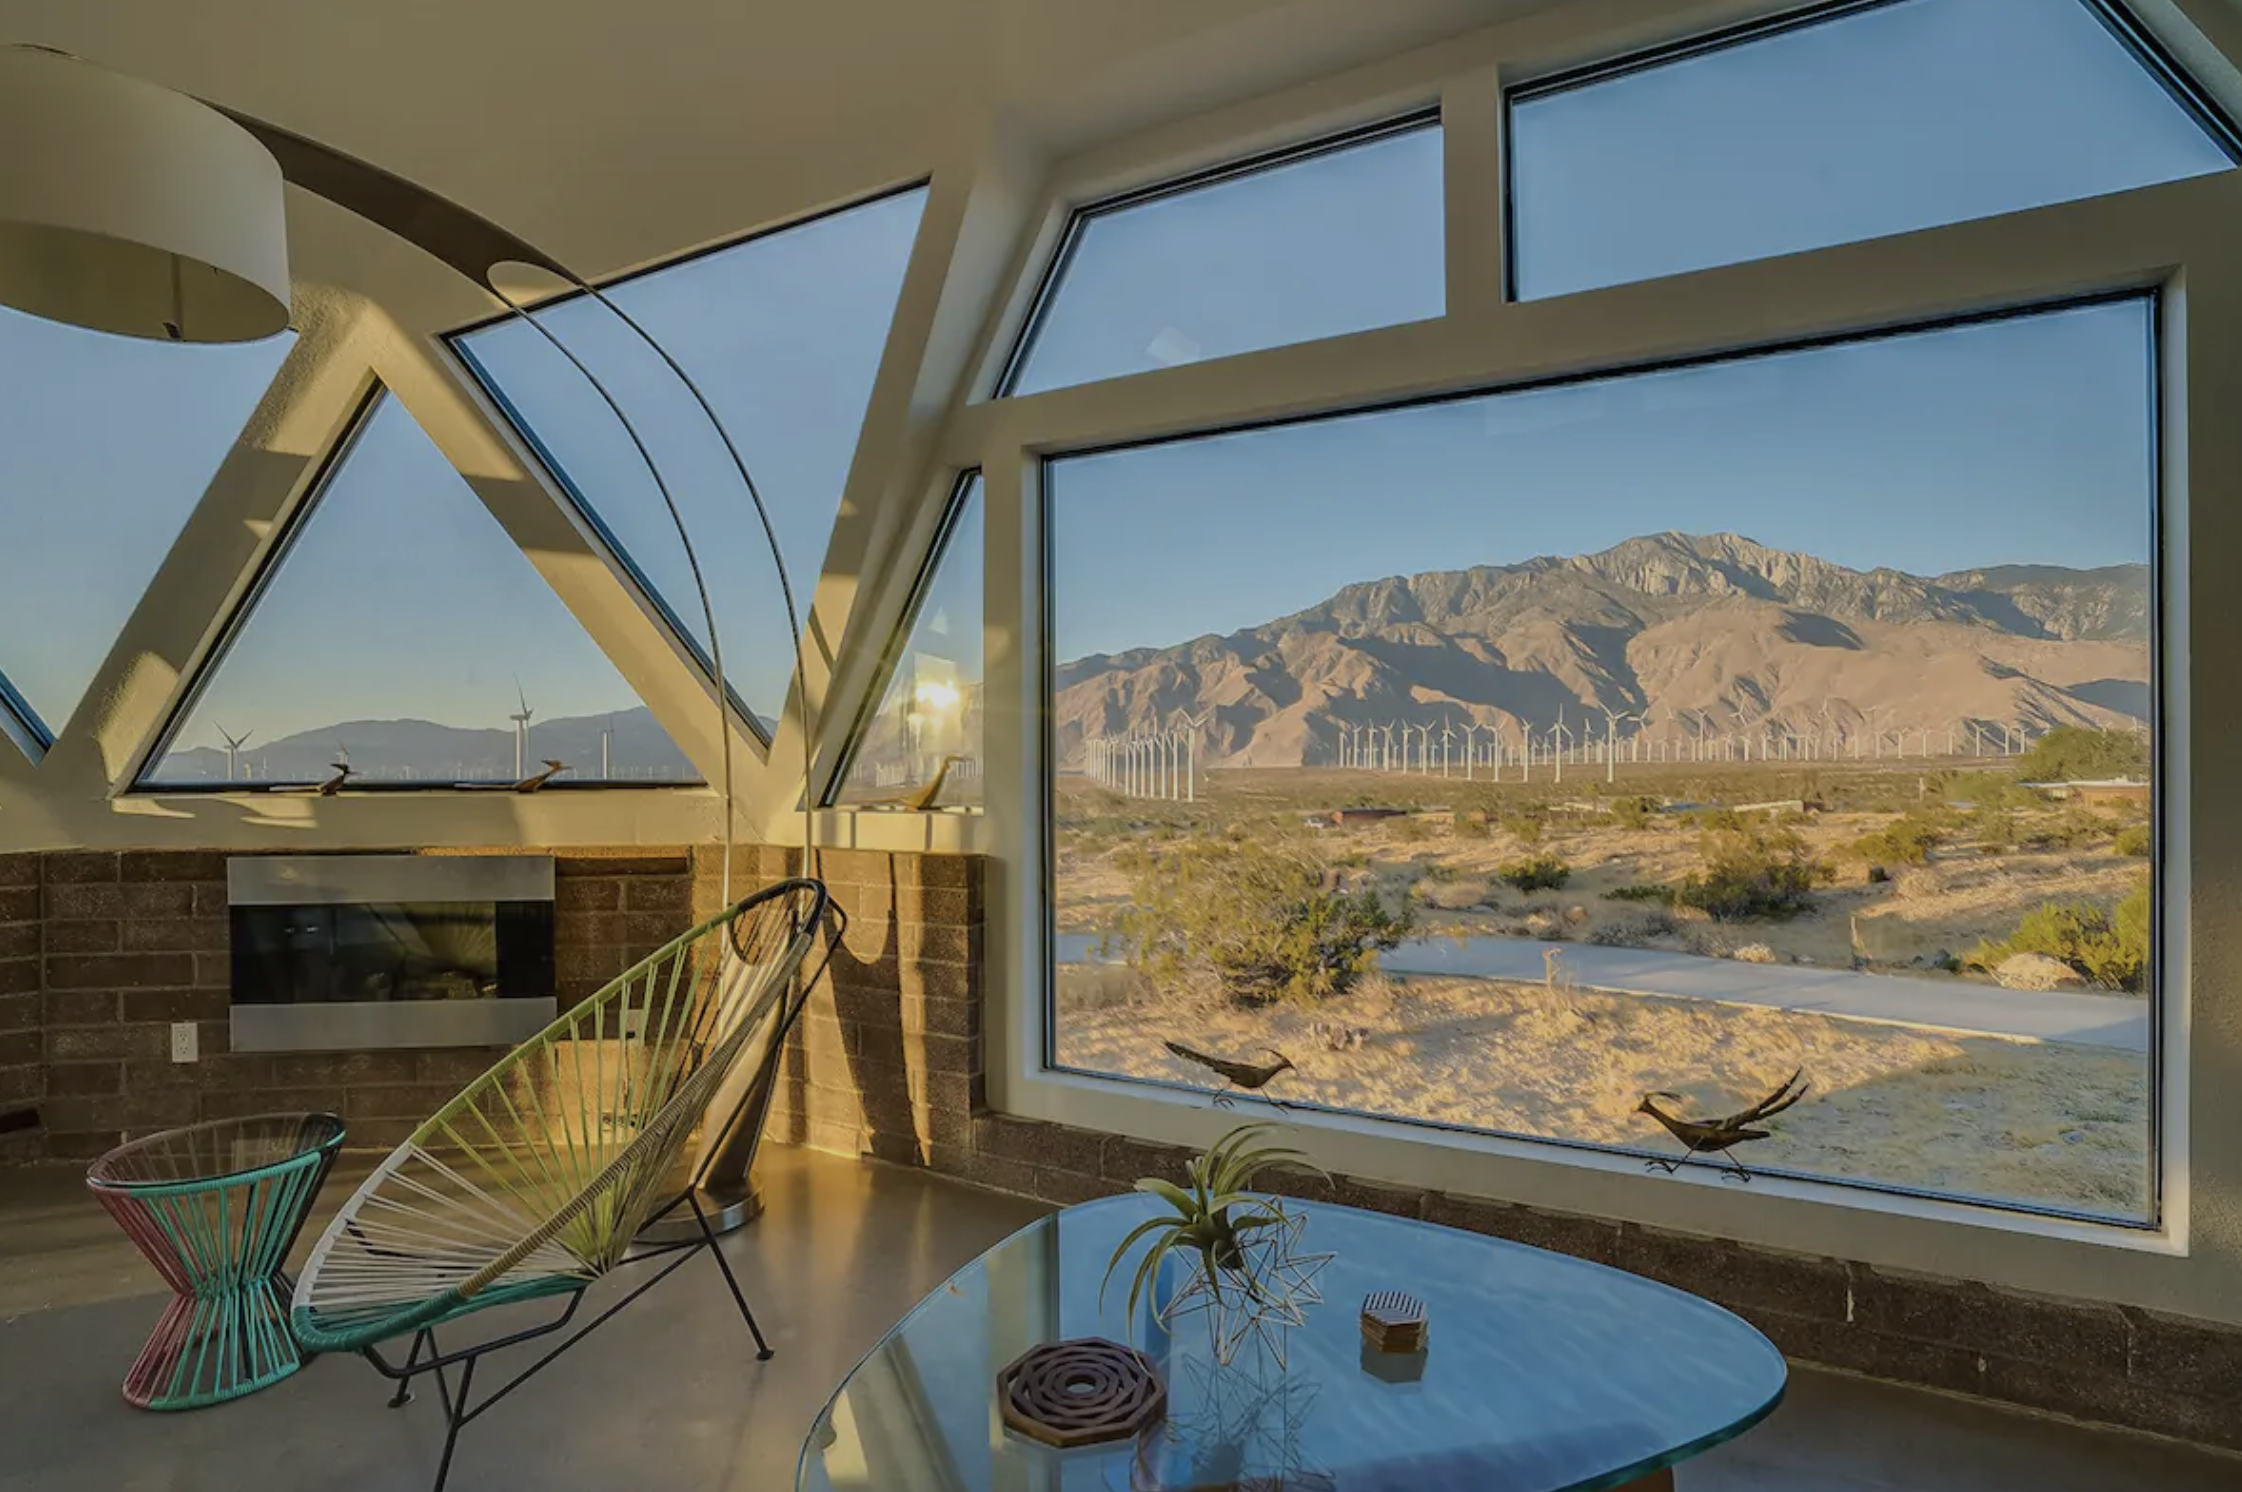 Interior of dome house airbnb | 10 coolest Airbnbs in Palm Springs